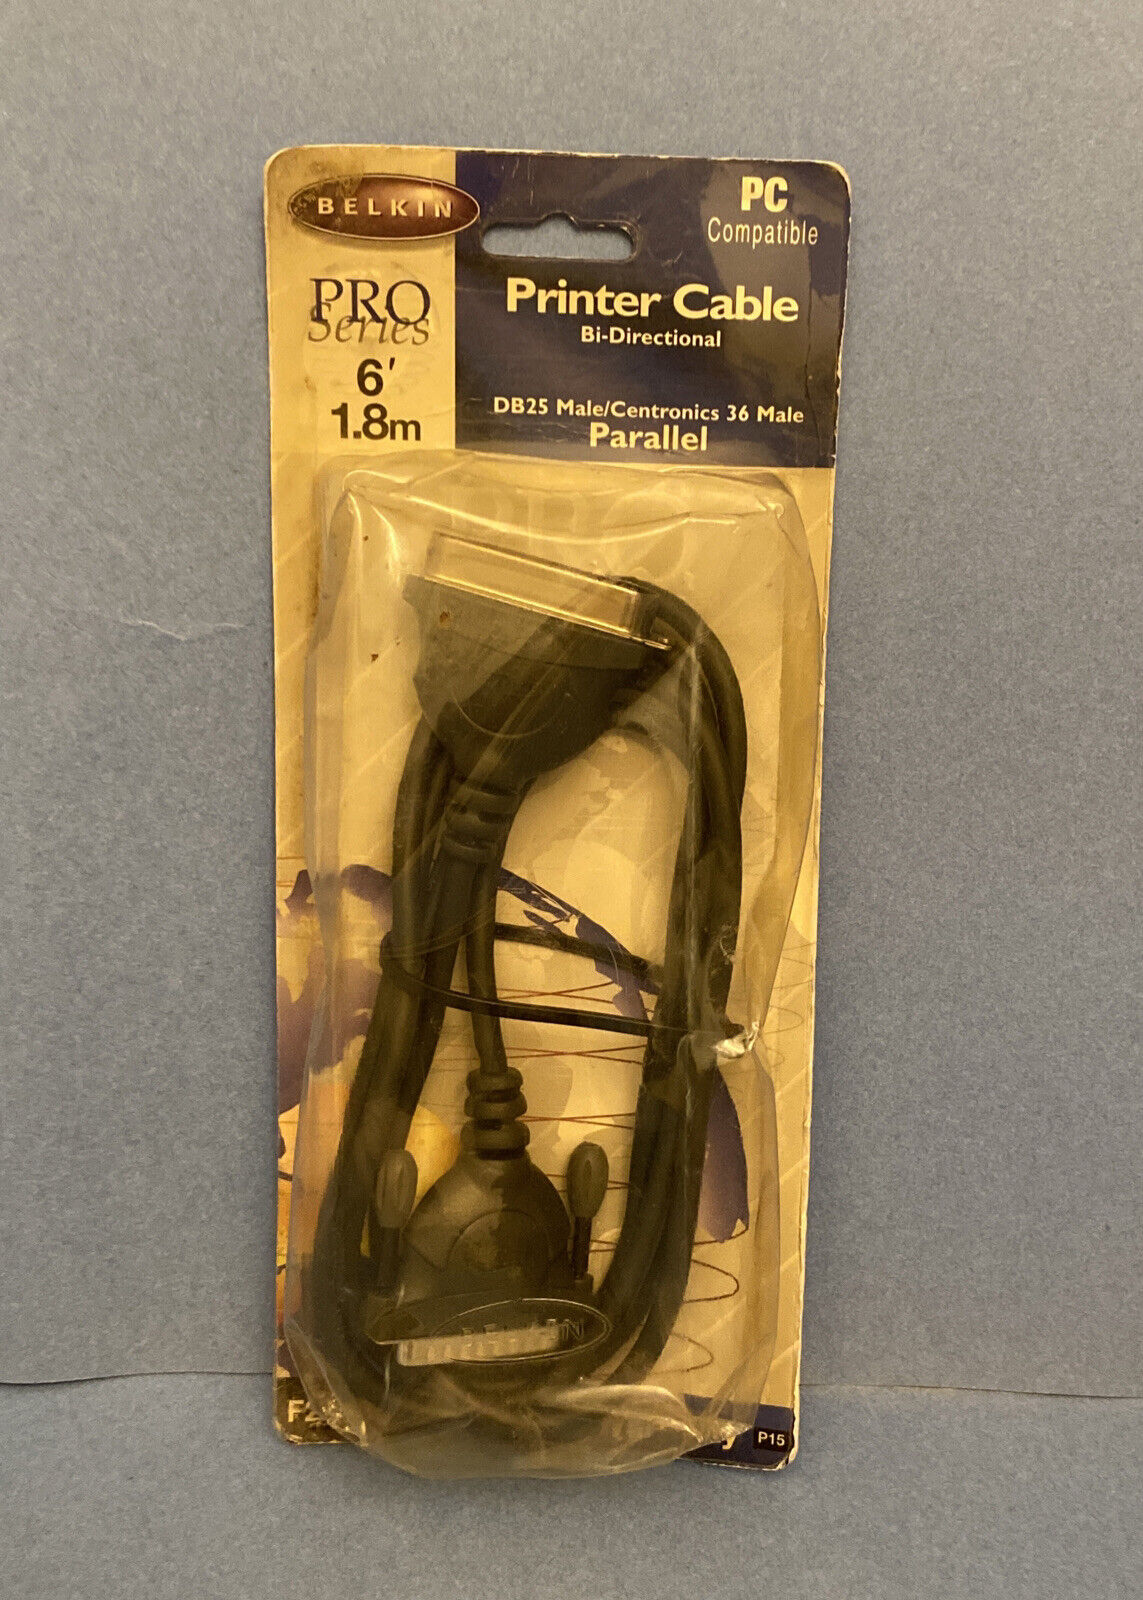 Belkin Pro Series DB25 Male Centronics 36 Parallel Printer Cable F2A036-06 6 ft